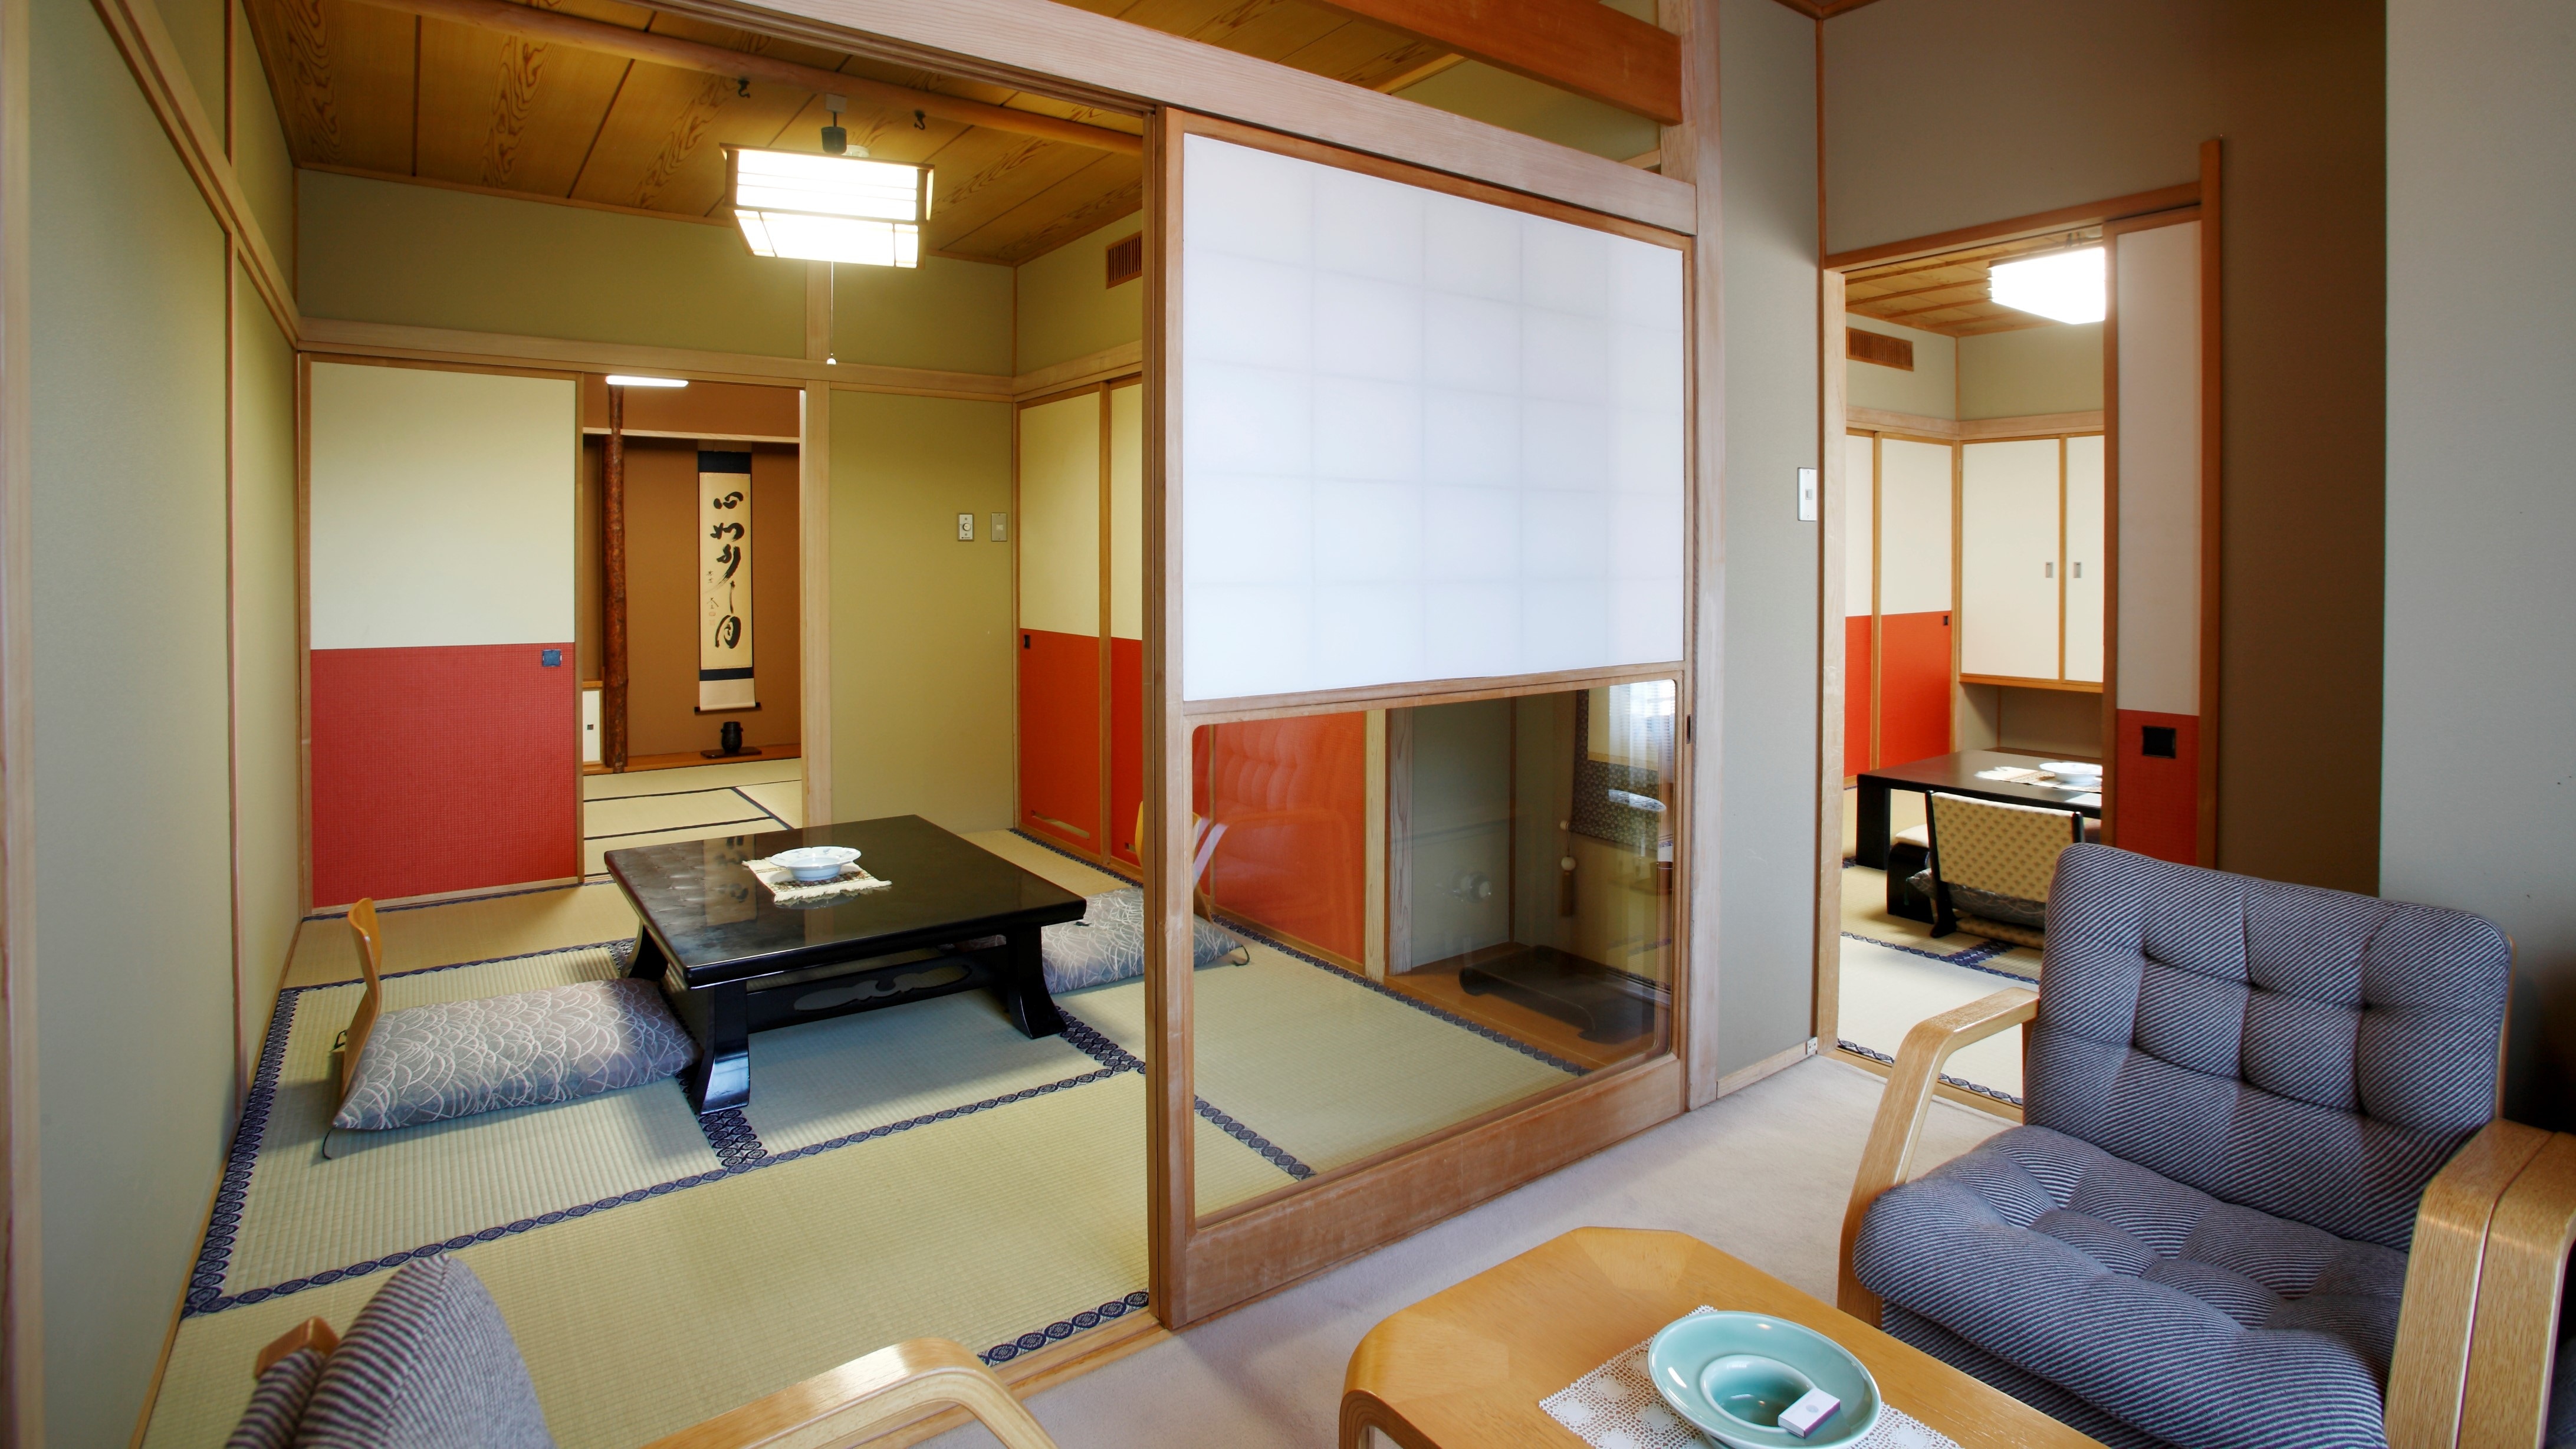 ◆ Special room Japanese-style room / 2 rooms with plenty of space. It is a high-quality space with a Japanese spirit. (Example of guest room)